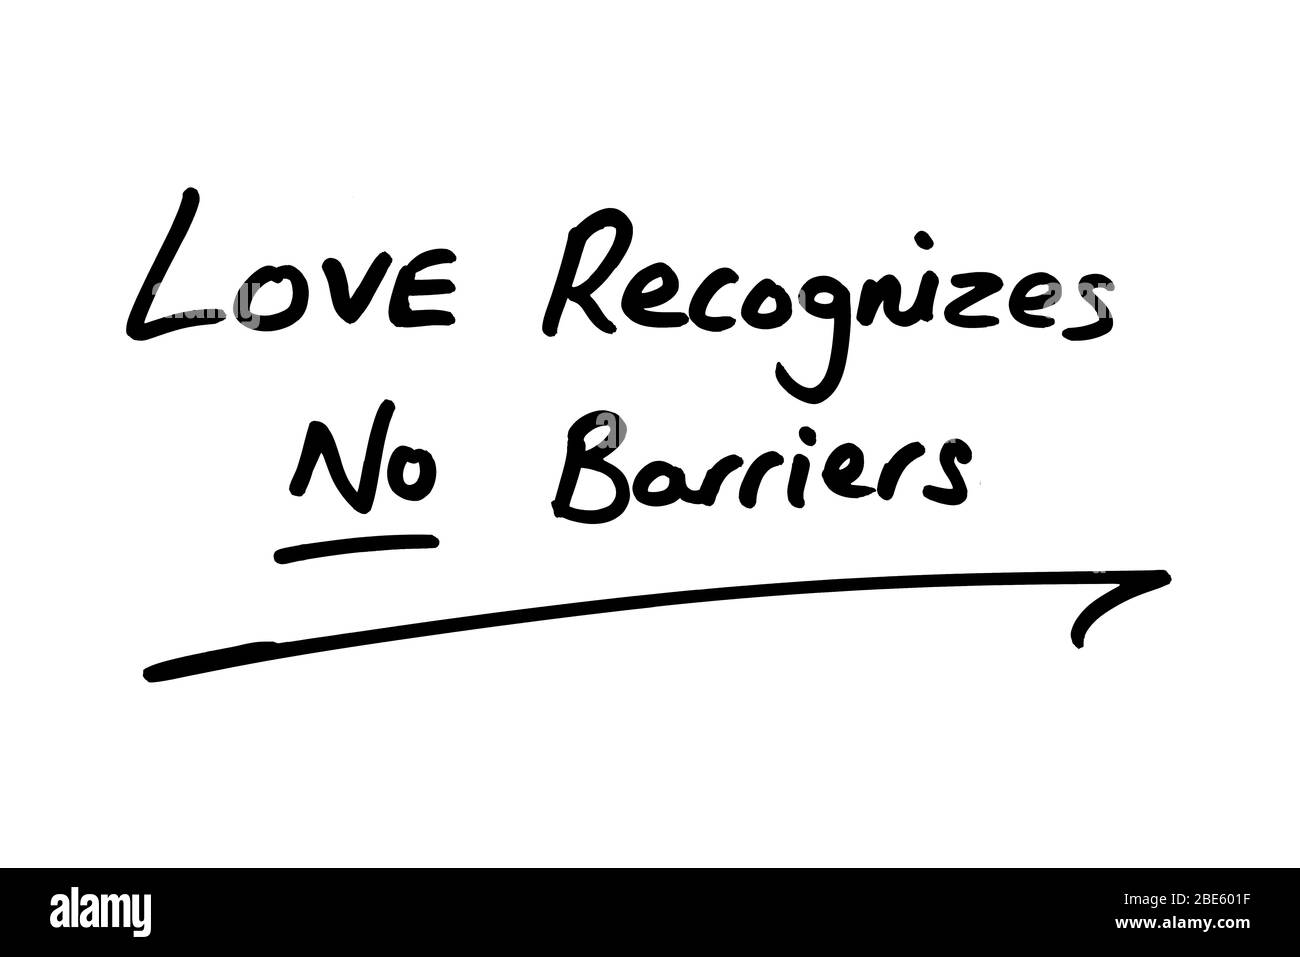 LOVE Recognizes NO Barriers, handwritten on a white background Stock Photo  - Alamy